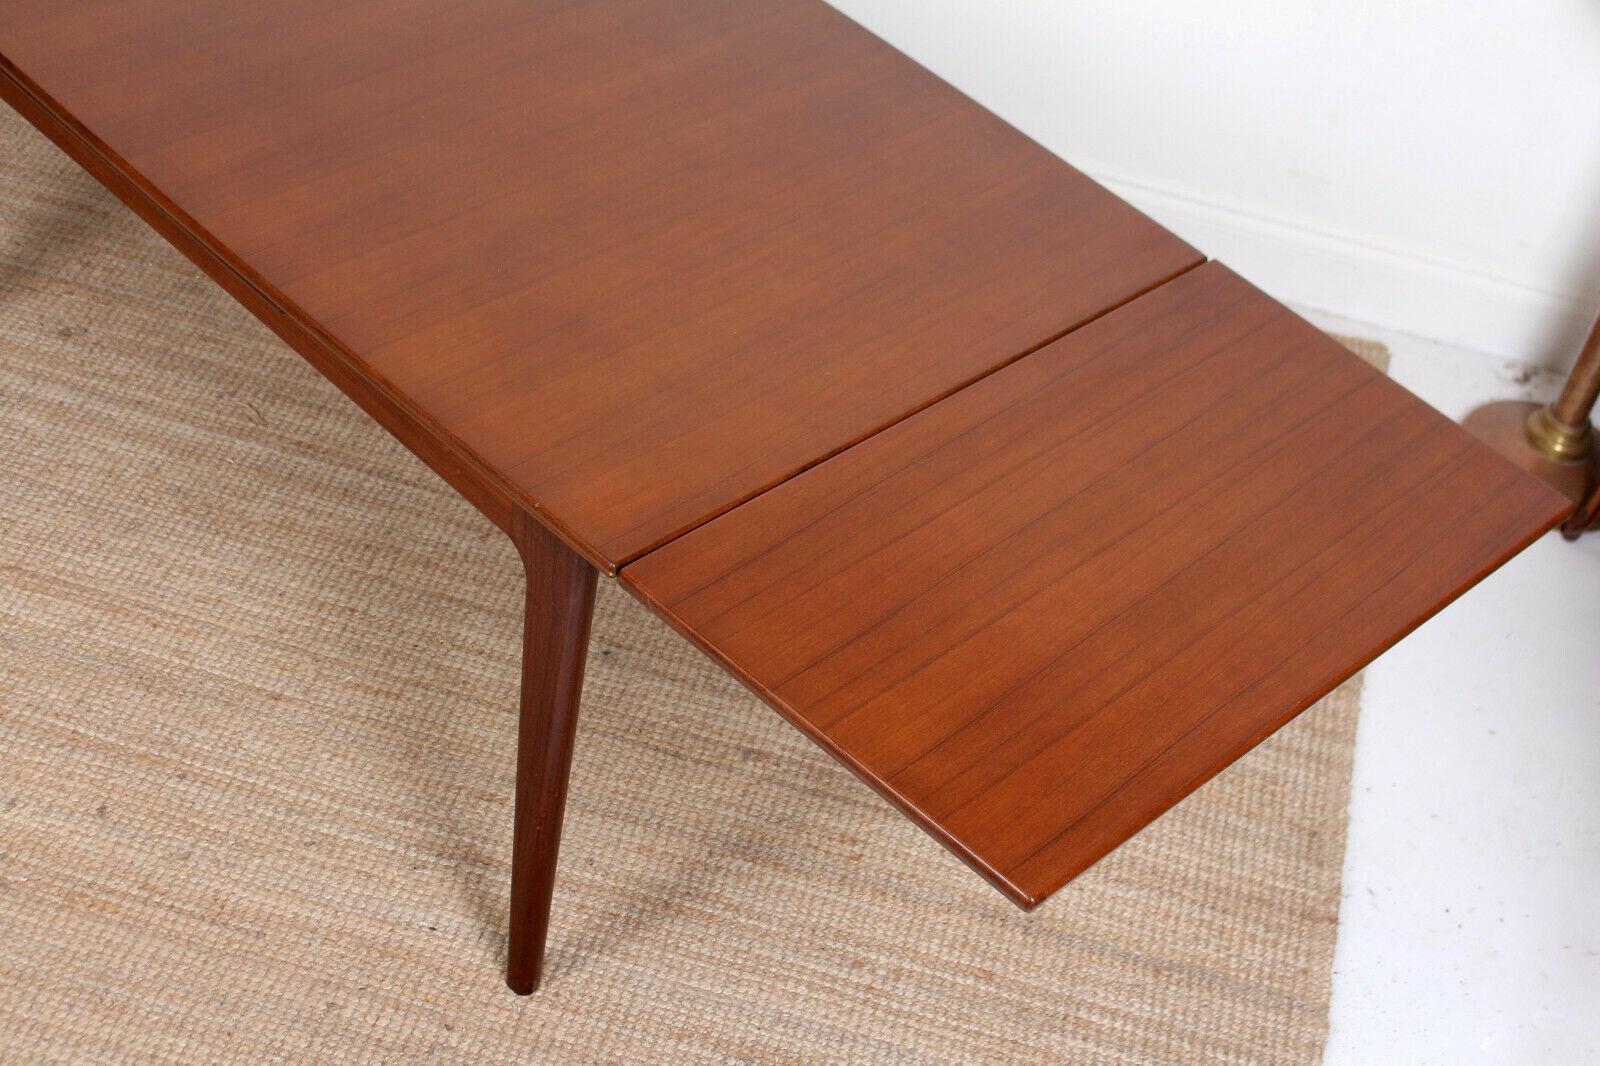 Danish Teak Dining Table and Chairs Mid-Century Modern 4 Chairs 6